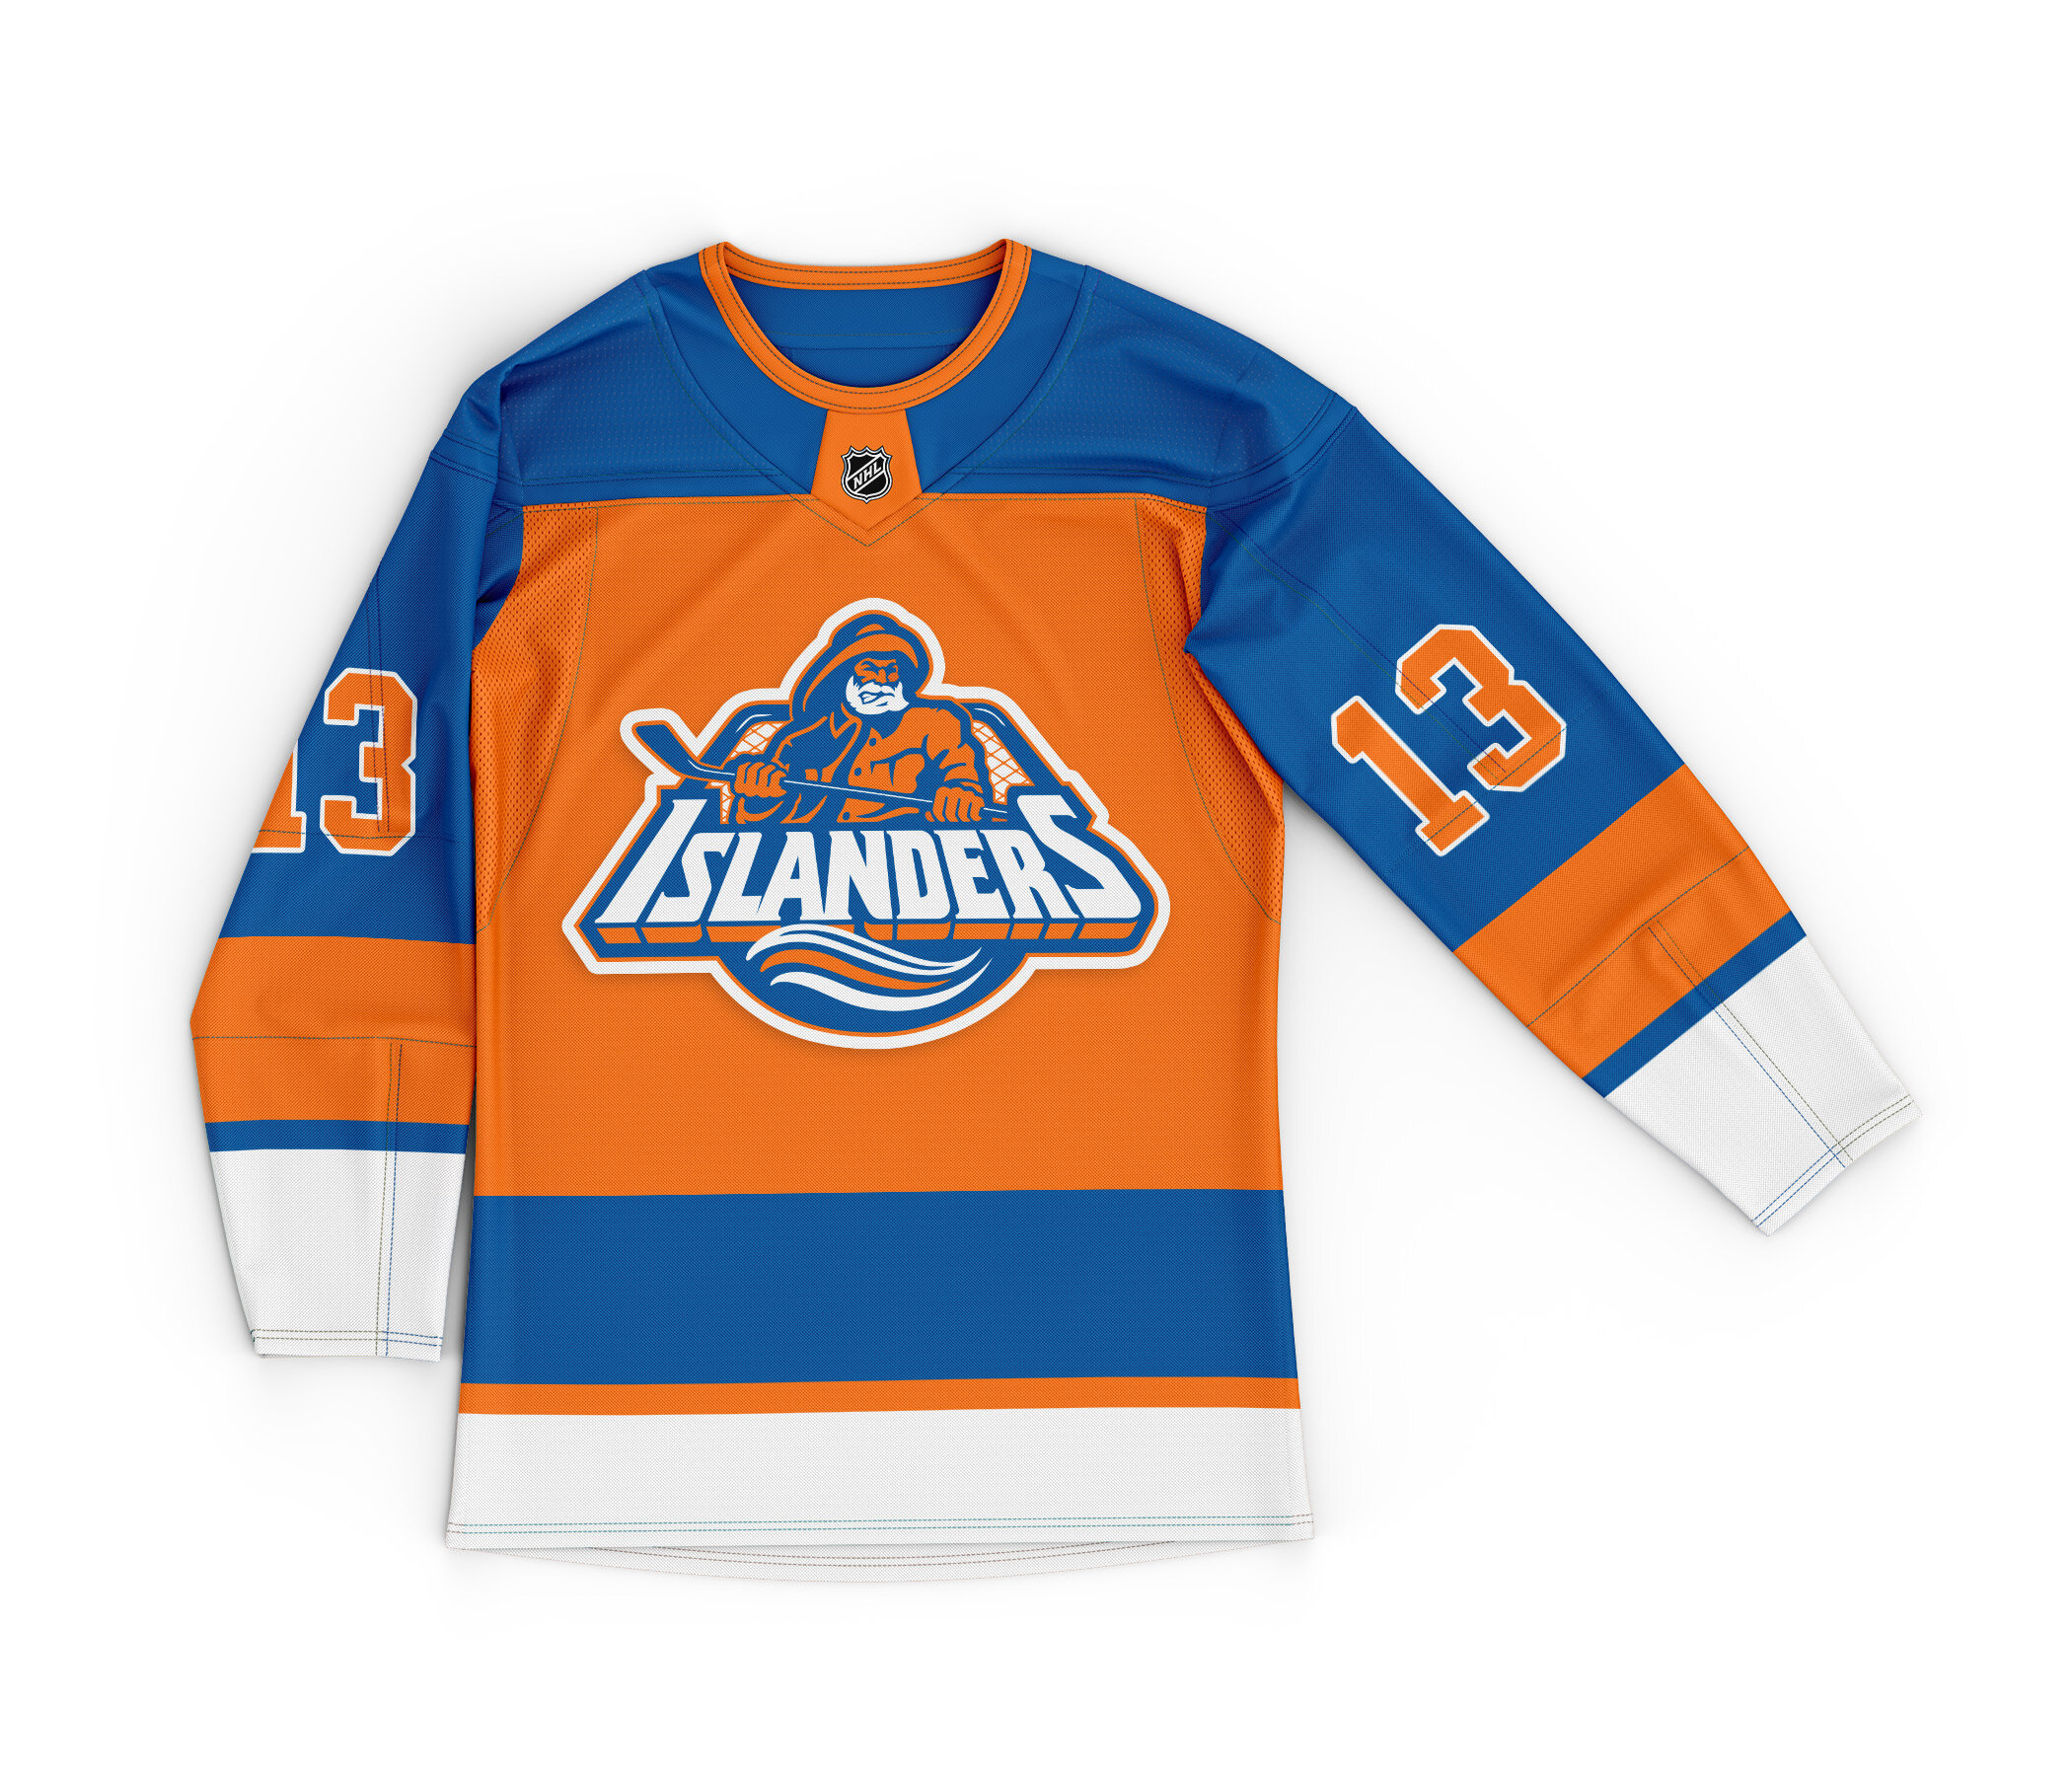 Islanders' Reverse Retro Jersey Review After Its Debut - Drive4Five